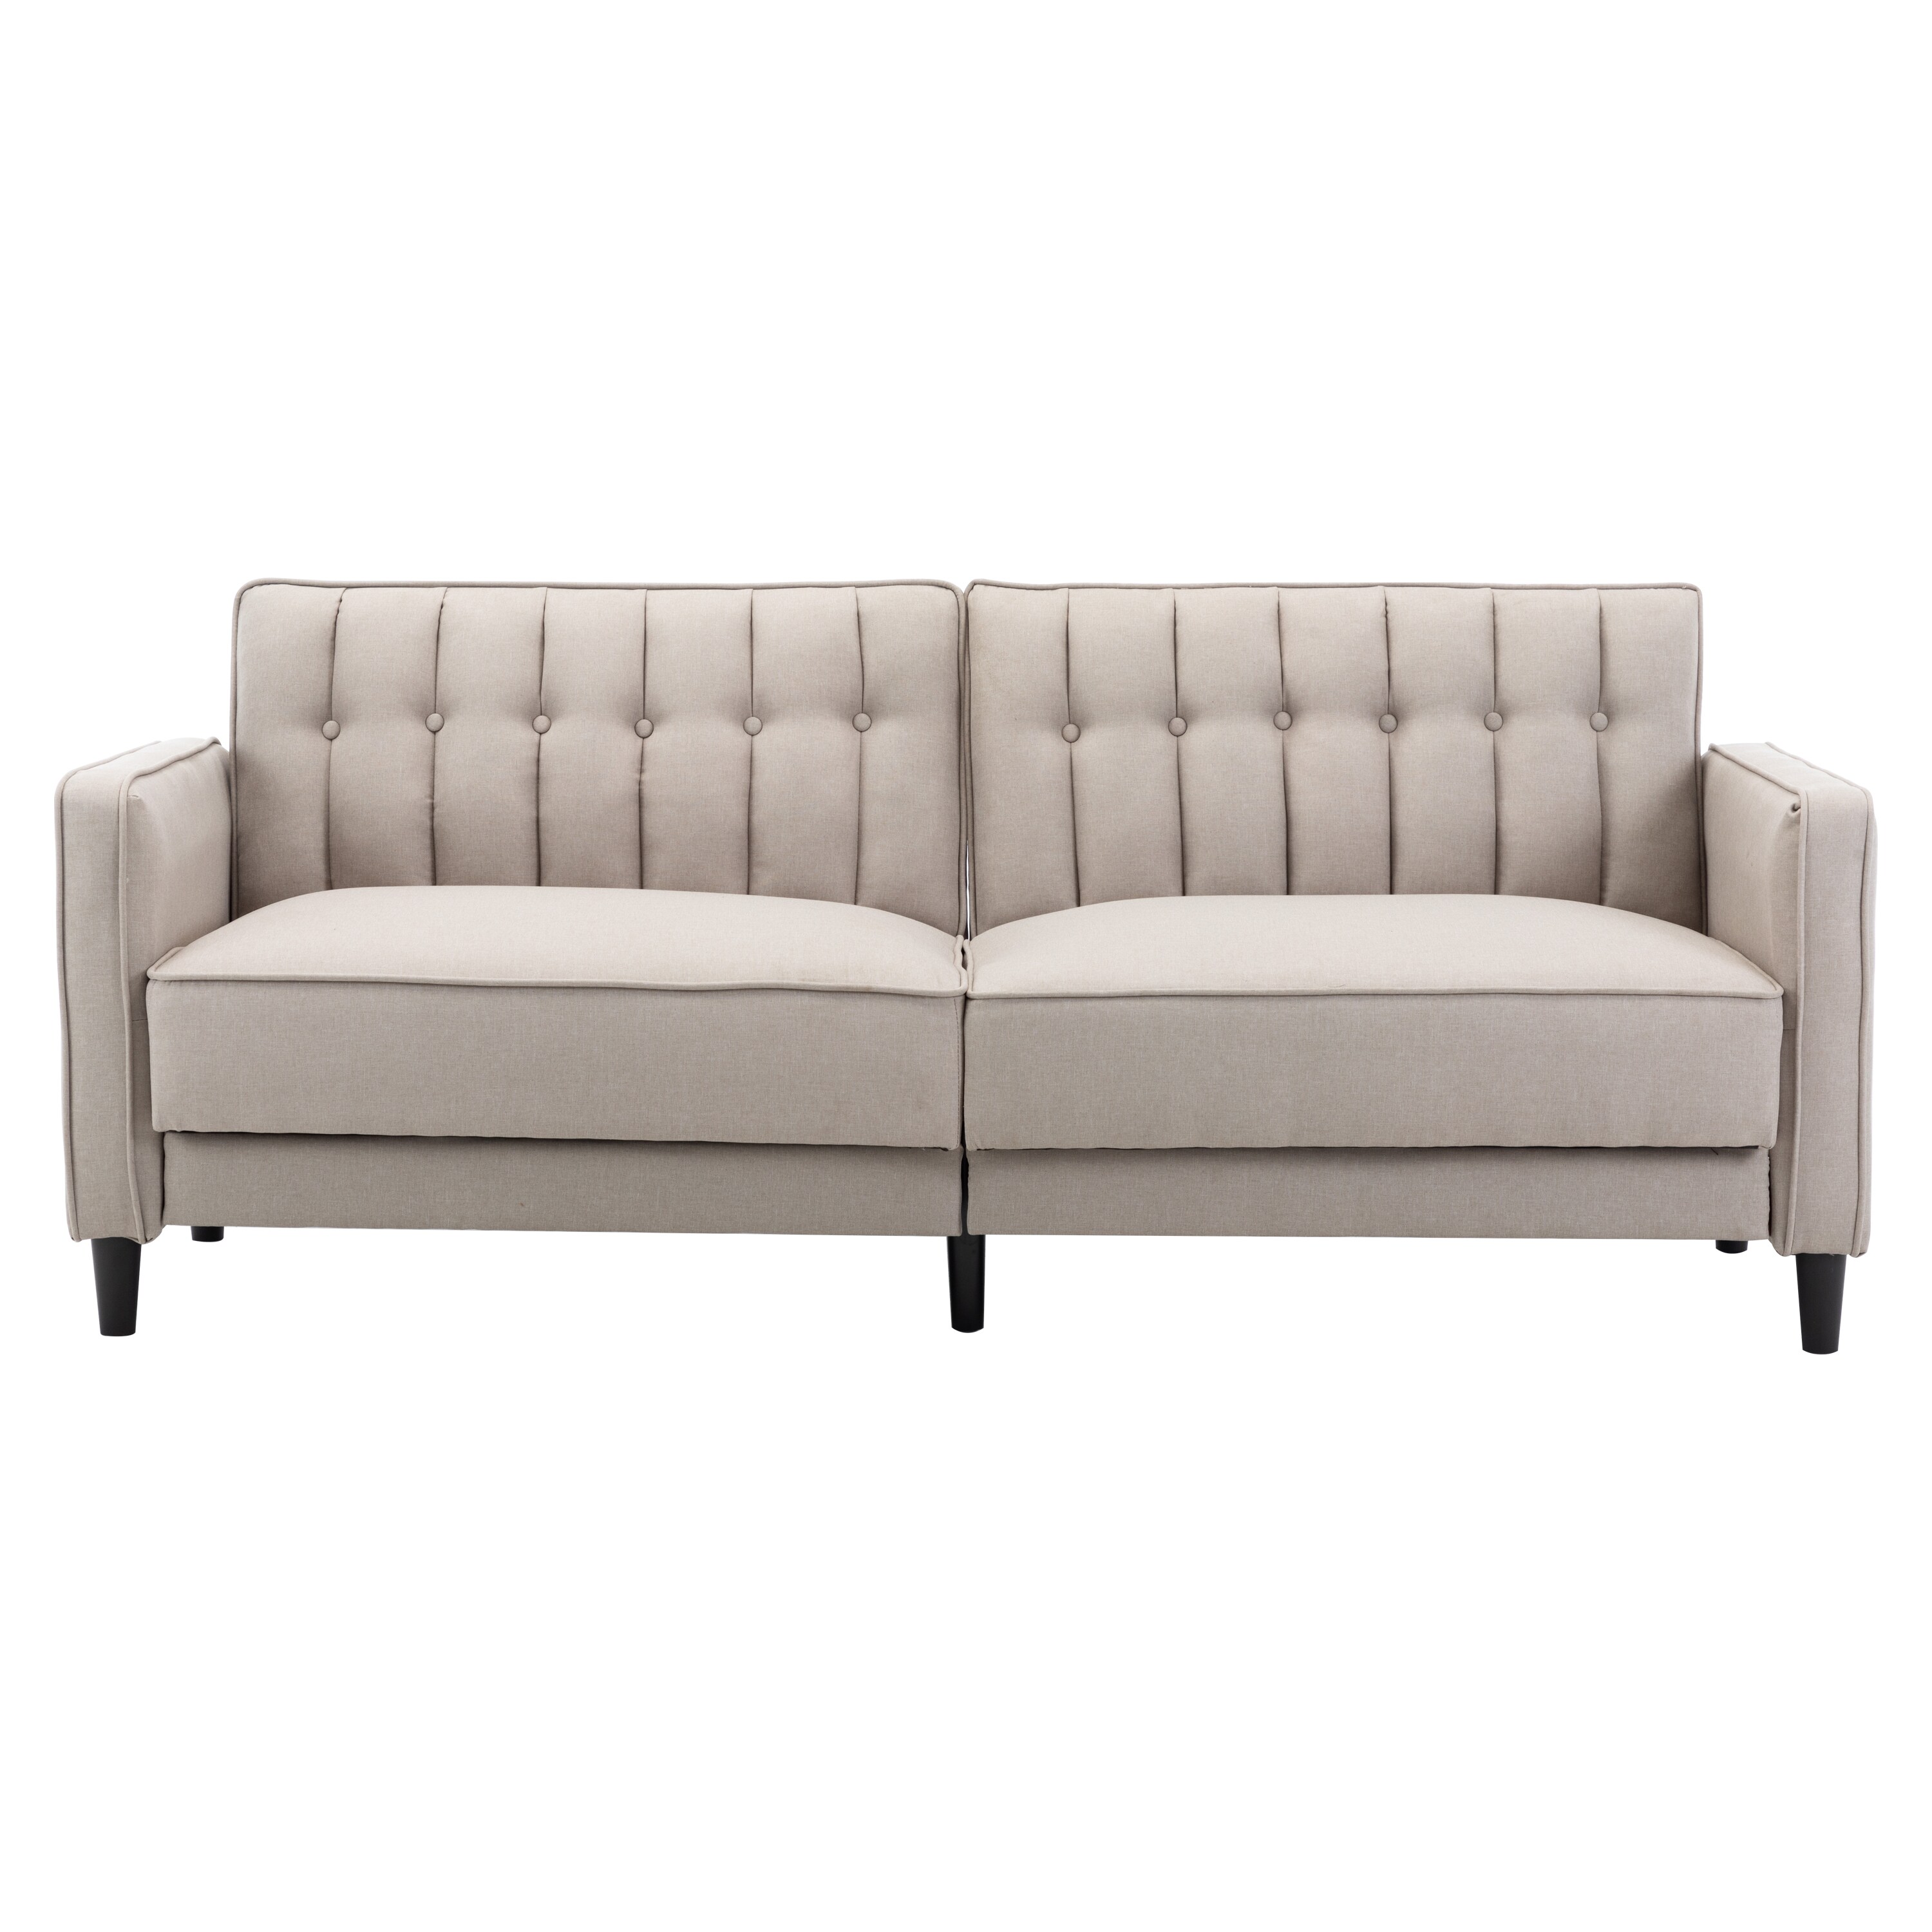 Ac Pacific Noah Modern On Tufted, Long Tufted Sofa Bed